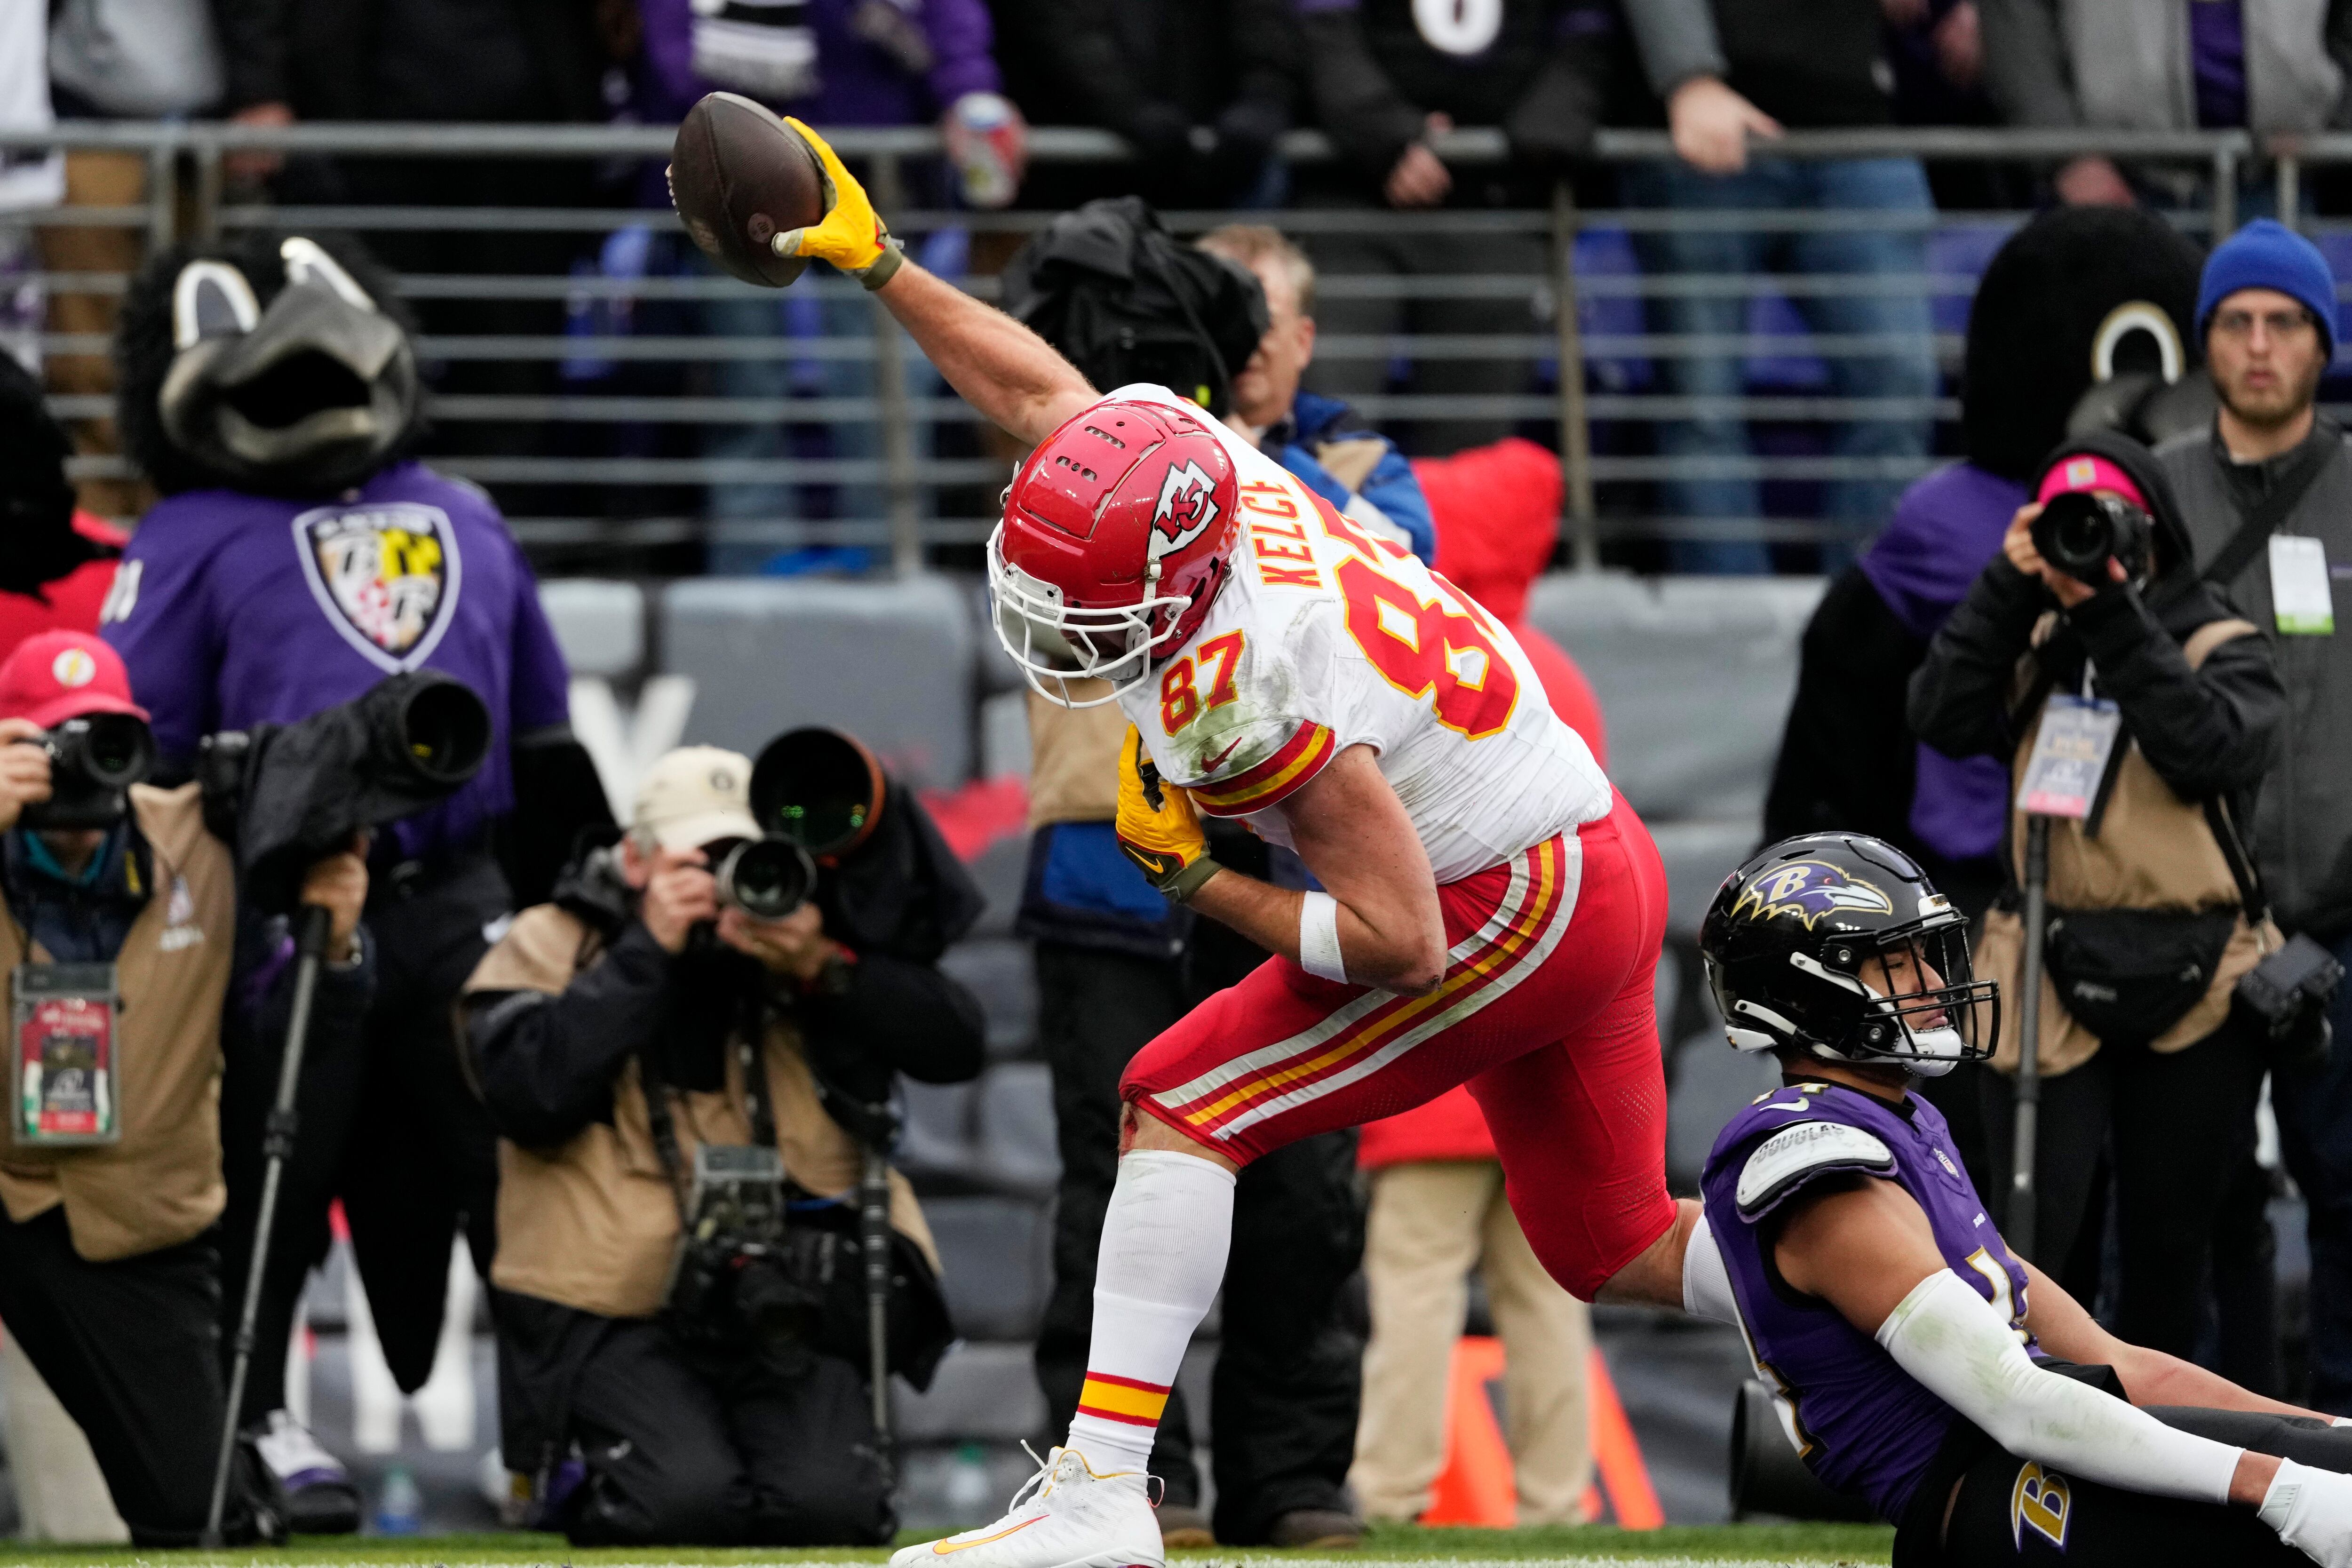 Another big game by Travis Kelce gets the Chiefs back to the Super